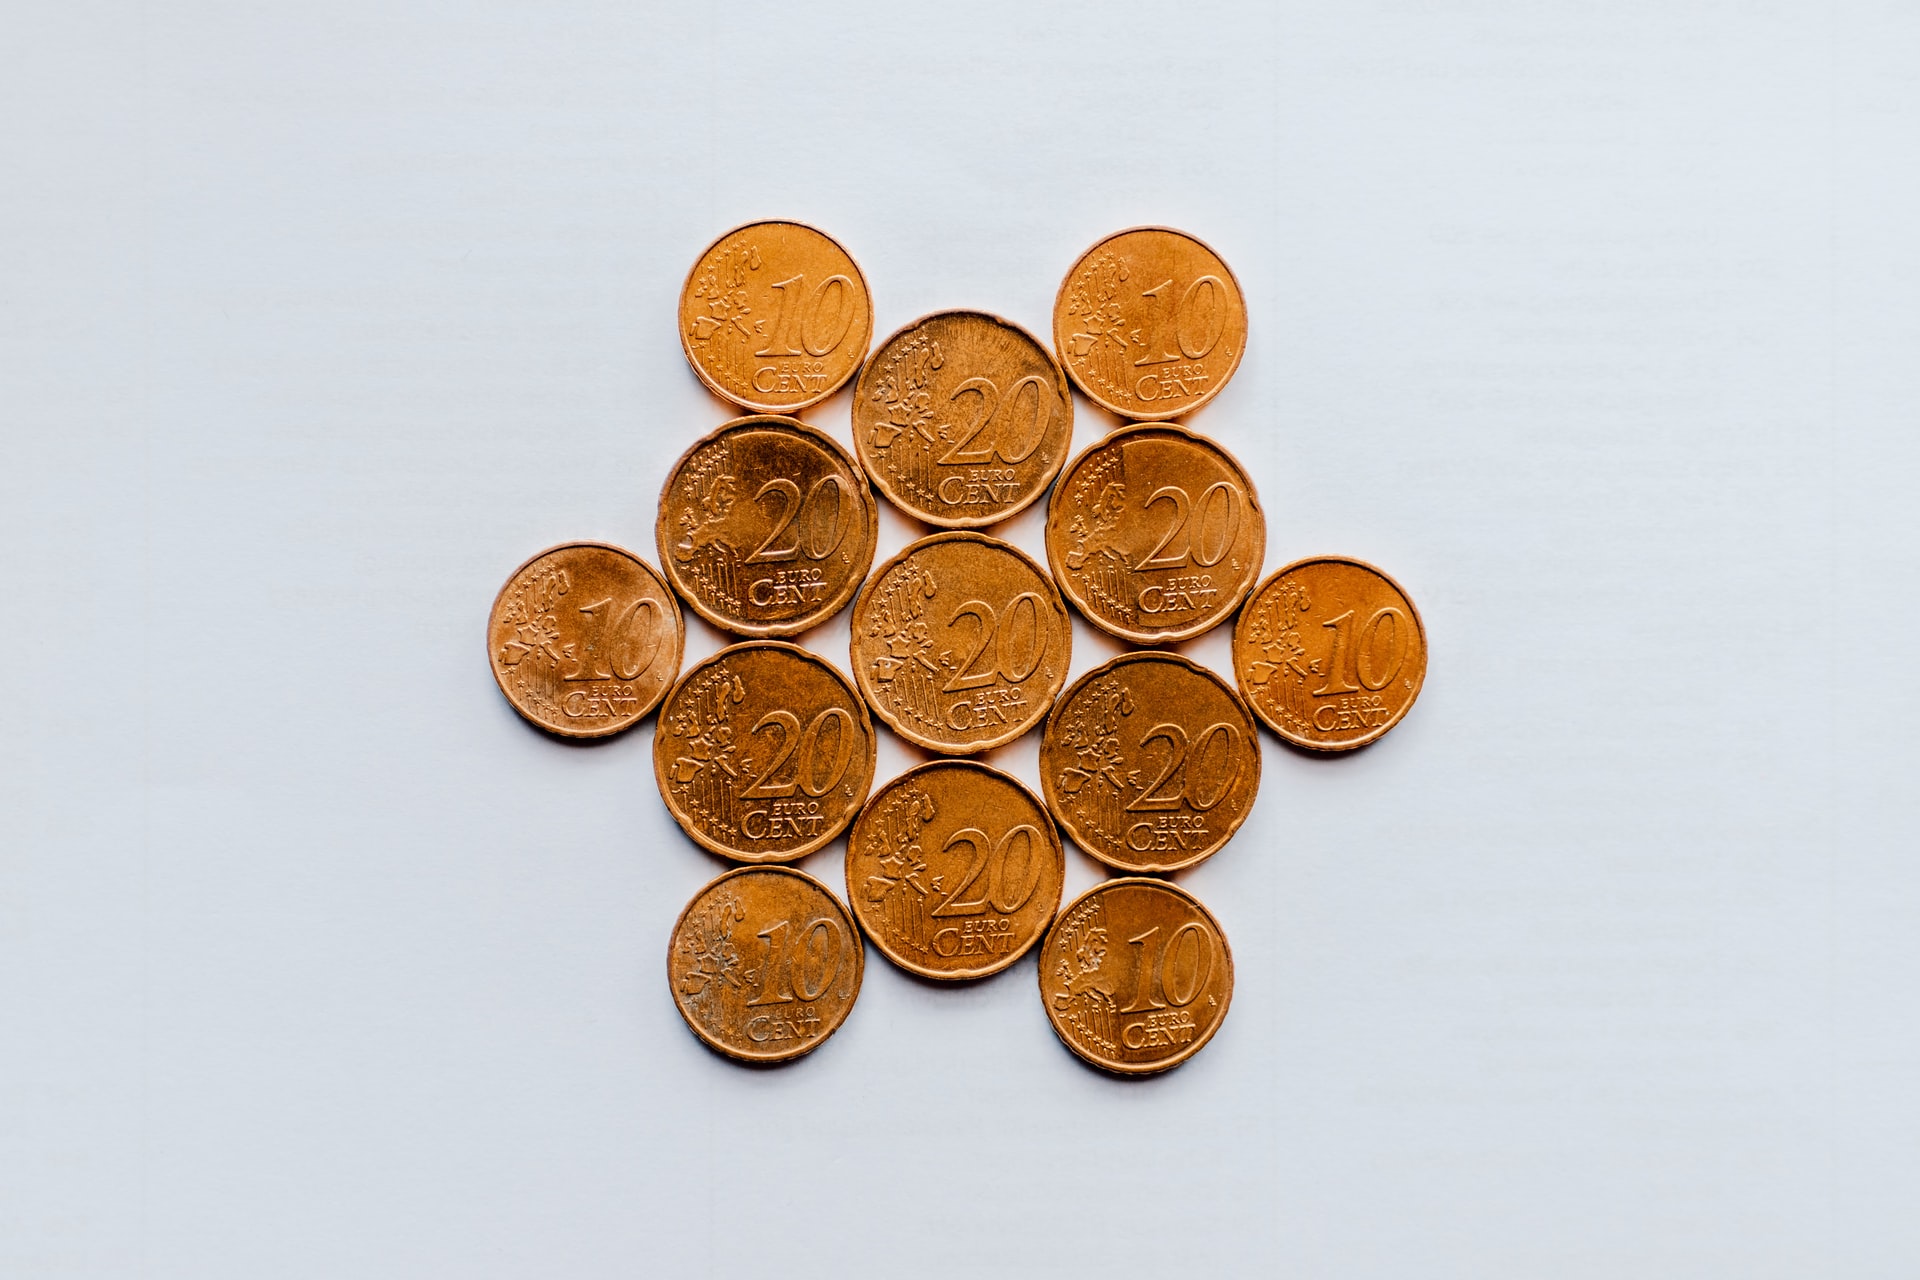 Photo of coins on a white background to illustrate the idea of is bitcoin money.